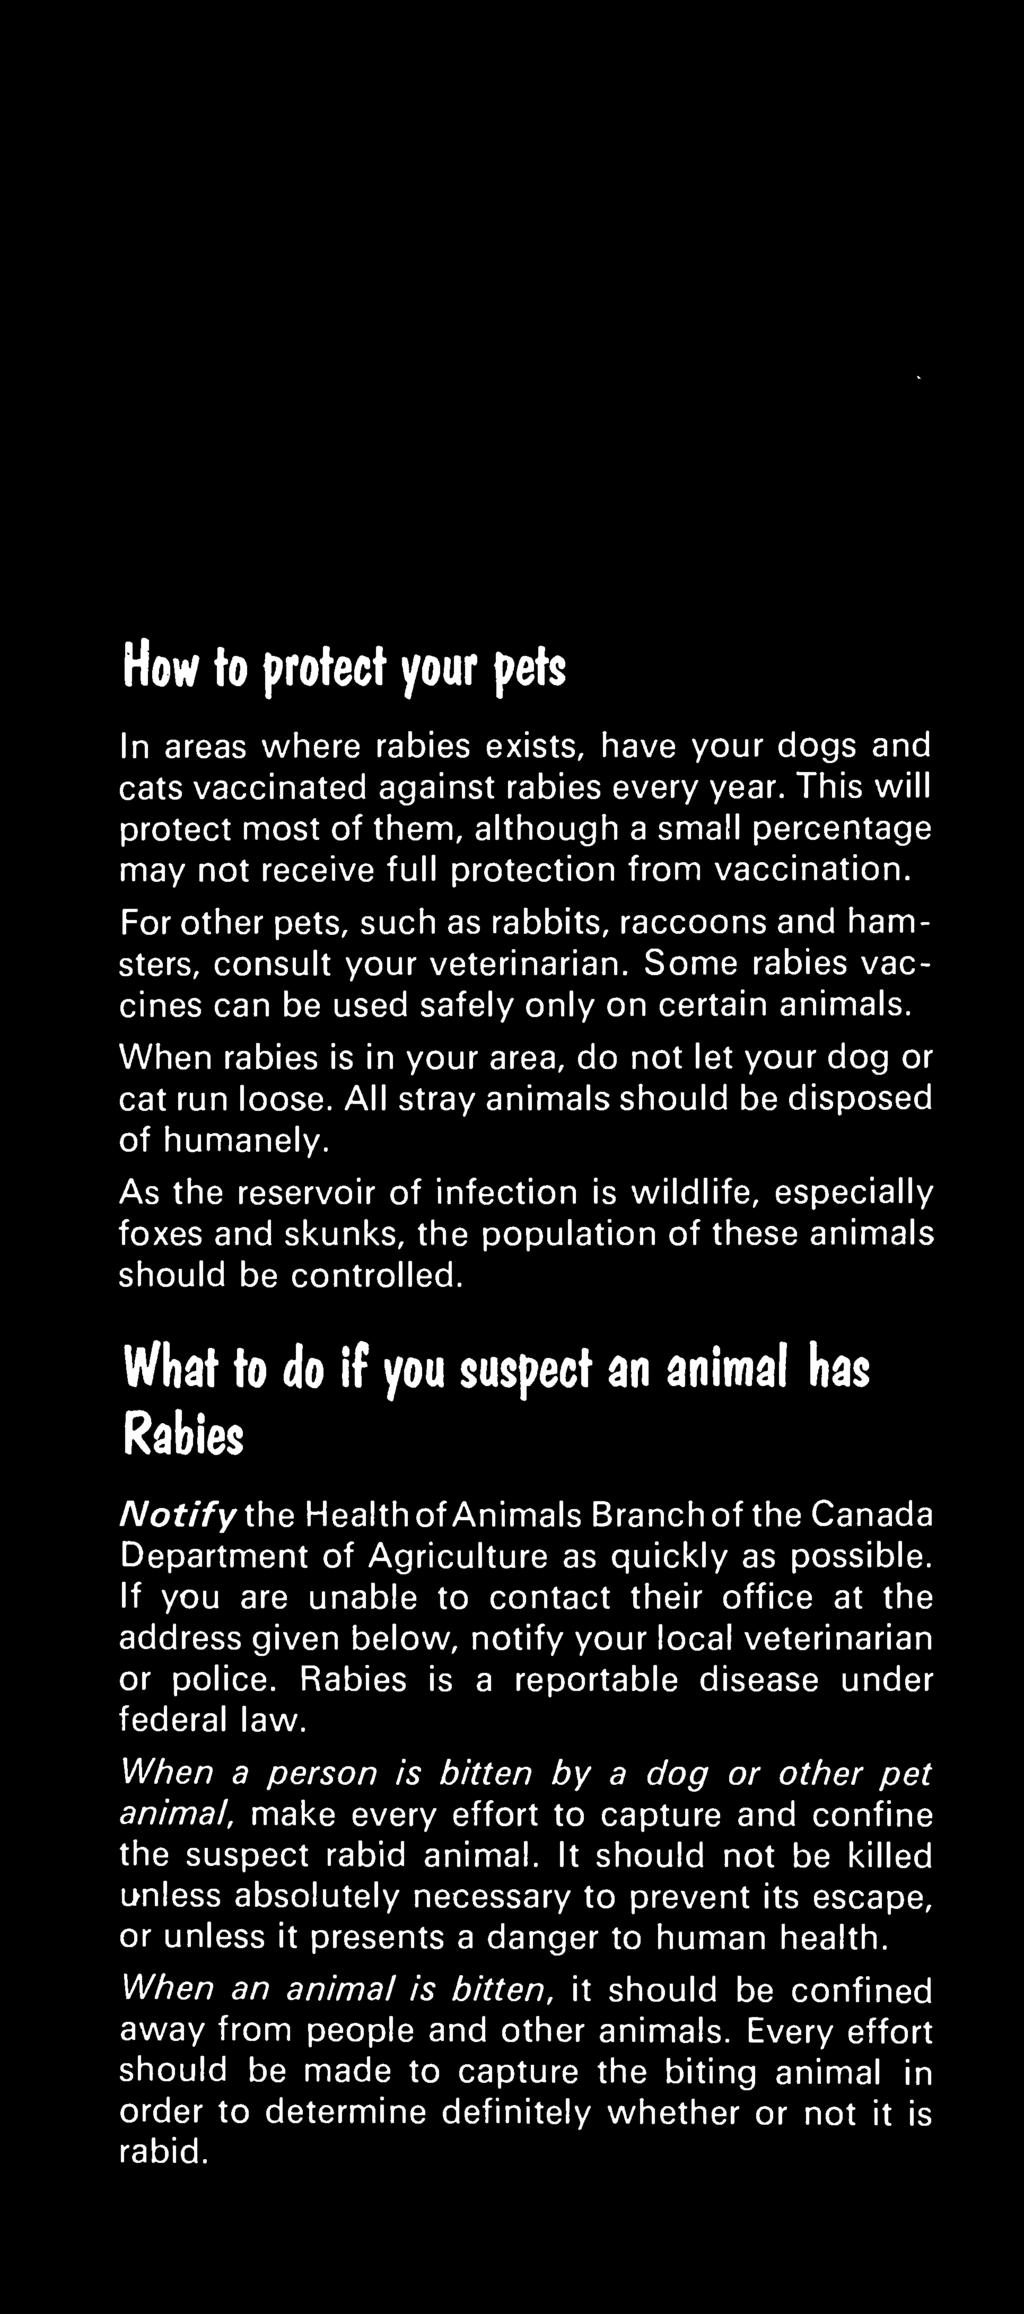 What to do if you suspect an animal has Rabies Notify the Health of Animals Branch of the Canada Department of Agriculture as quickly as possible.